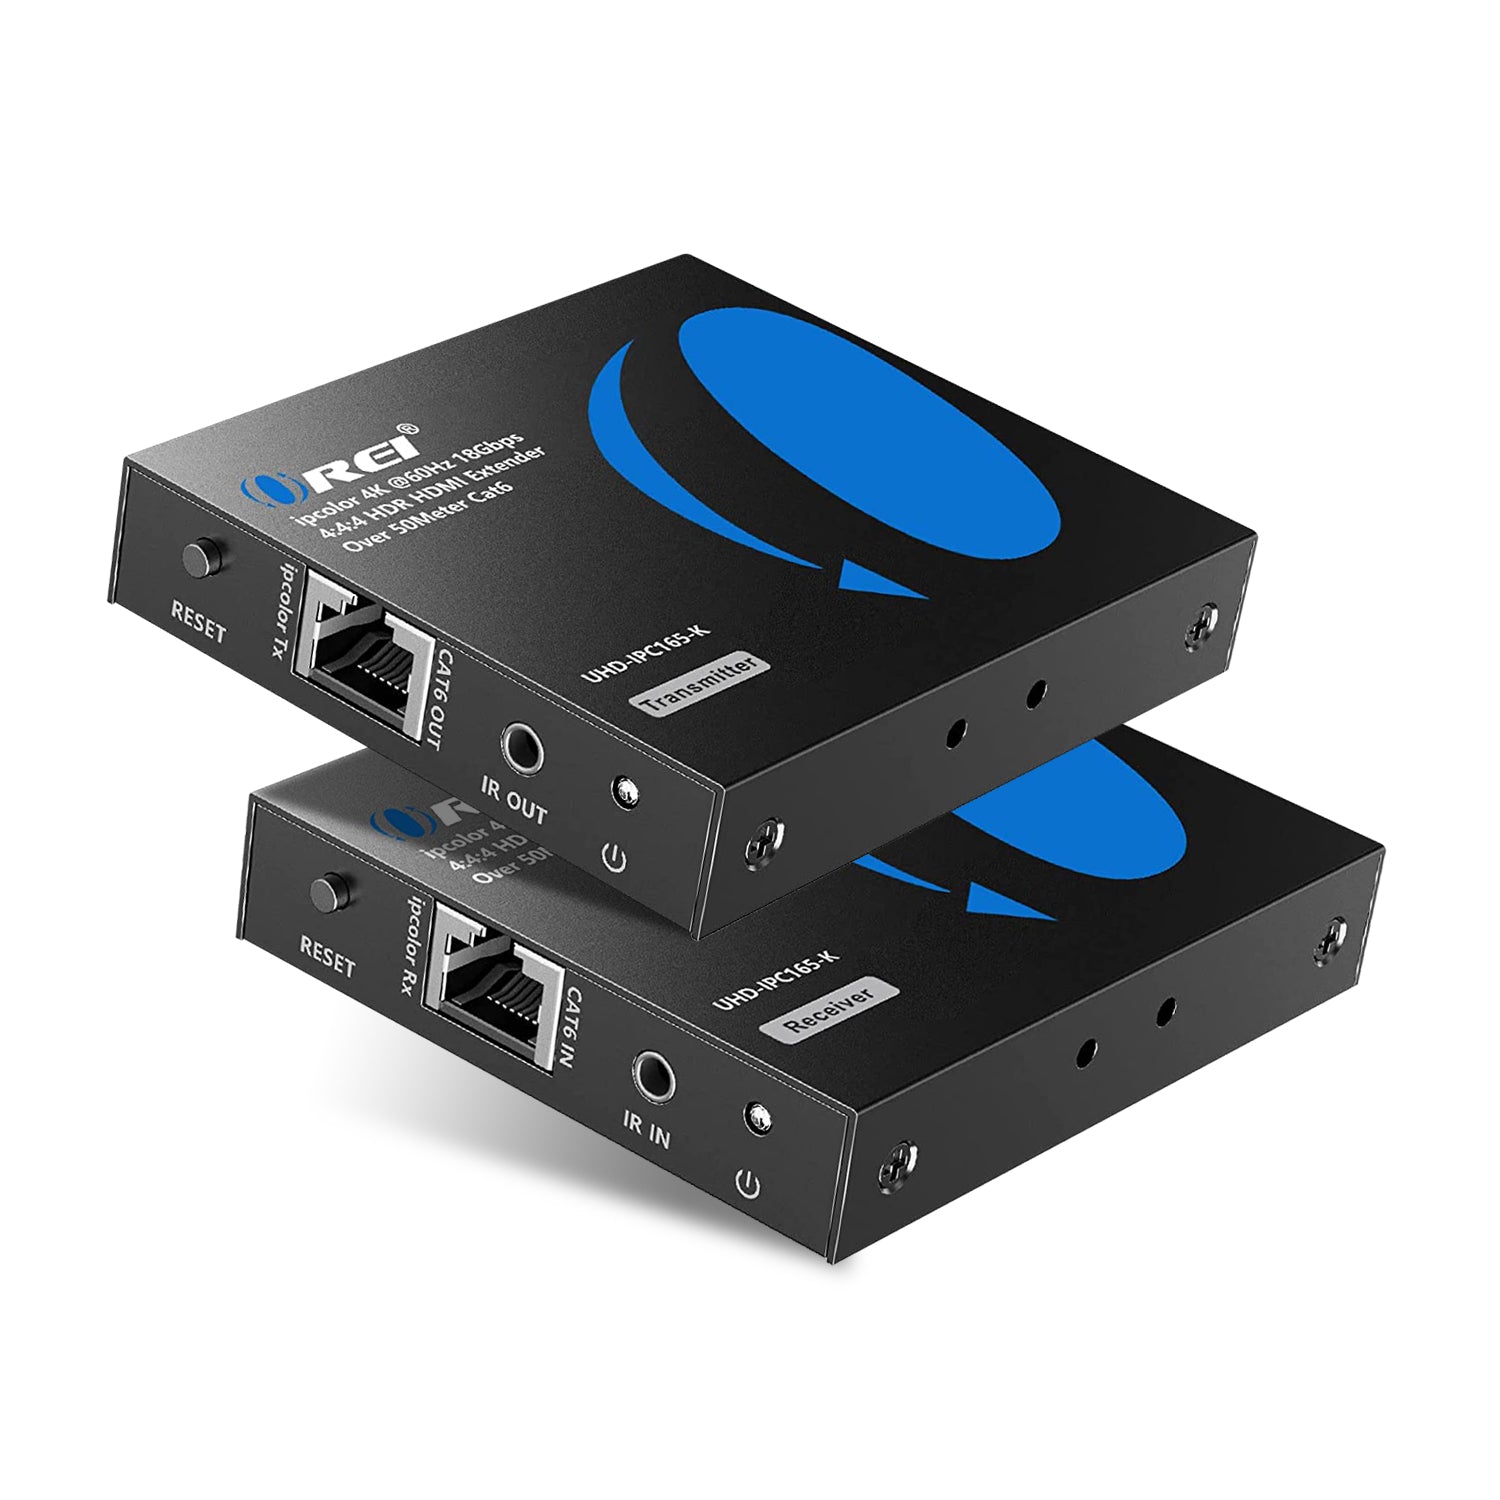 Shop HDMI Extender & Receiver for HD Video Solution